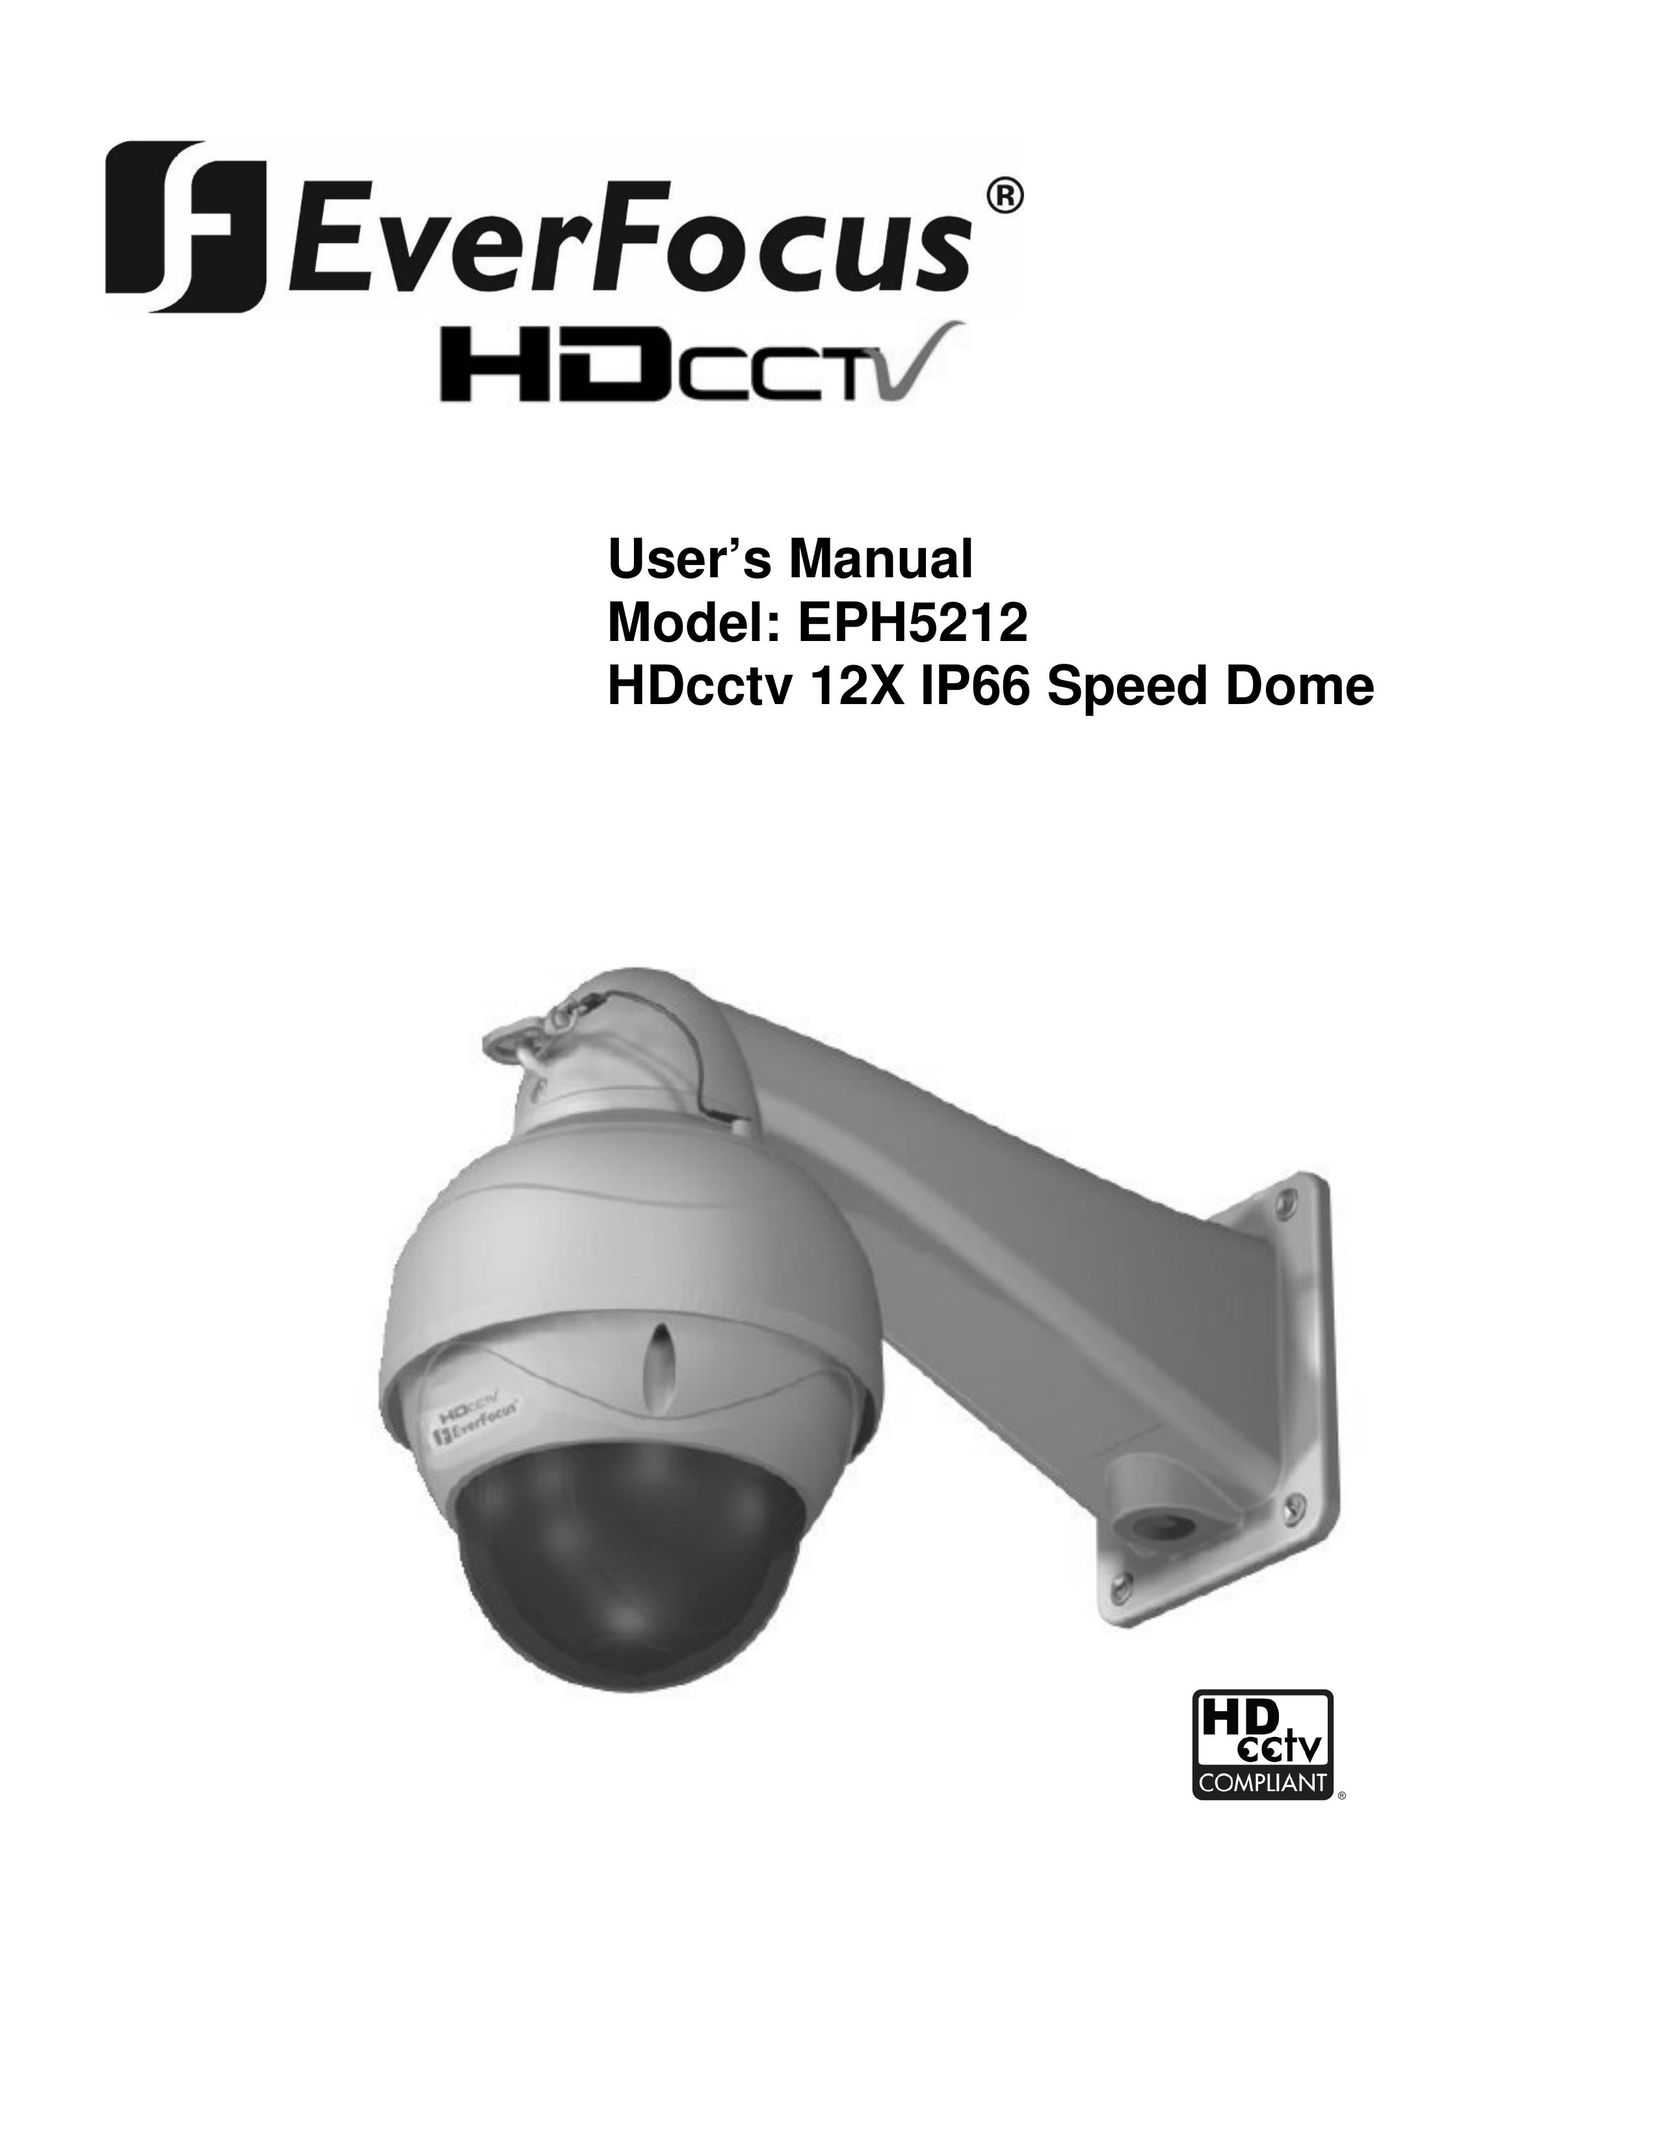 EverFocus EPH5212 Home Security System User Manual